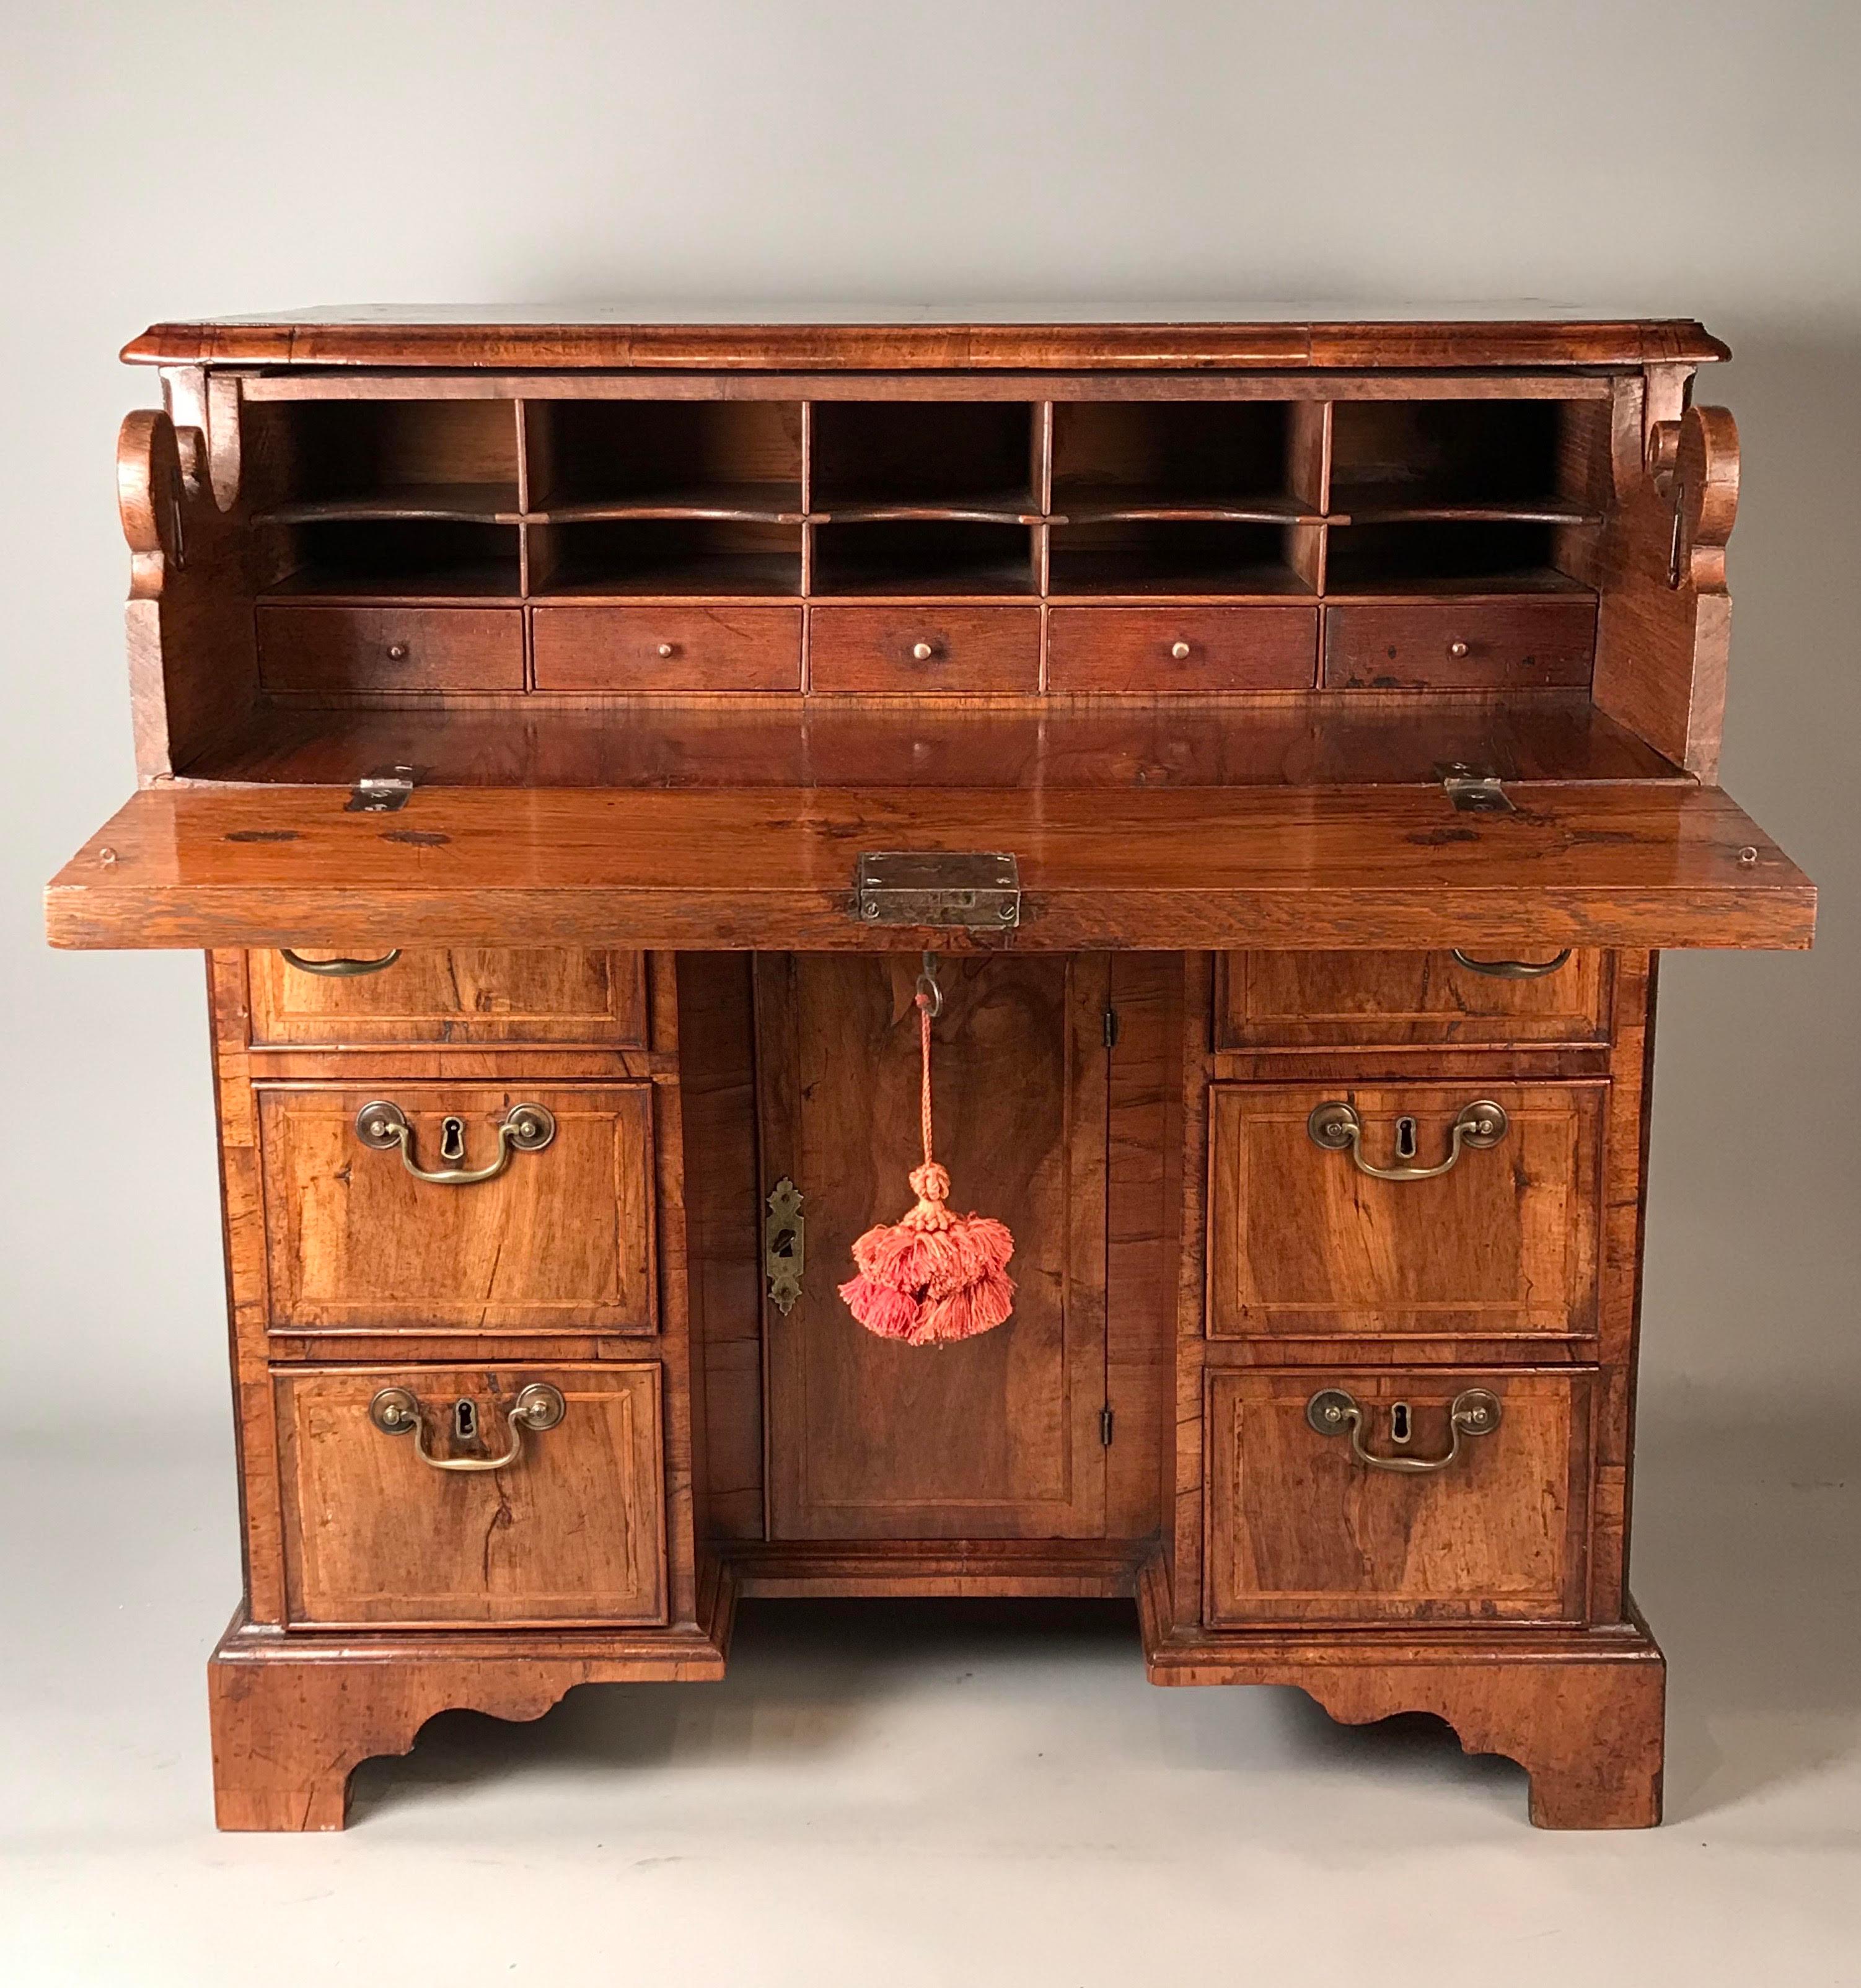 An English early 18th century walnut secrétaire kneehole desk.
George I period (1714-1727), c 1720.
Of exceptional waxed honey color and lovely old patina, with well-matched veneers.

With a quarter-veneered top. Six short drawers below a hinged